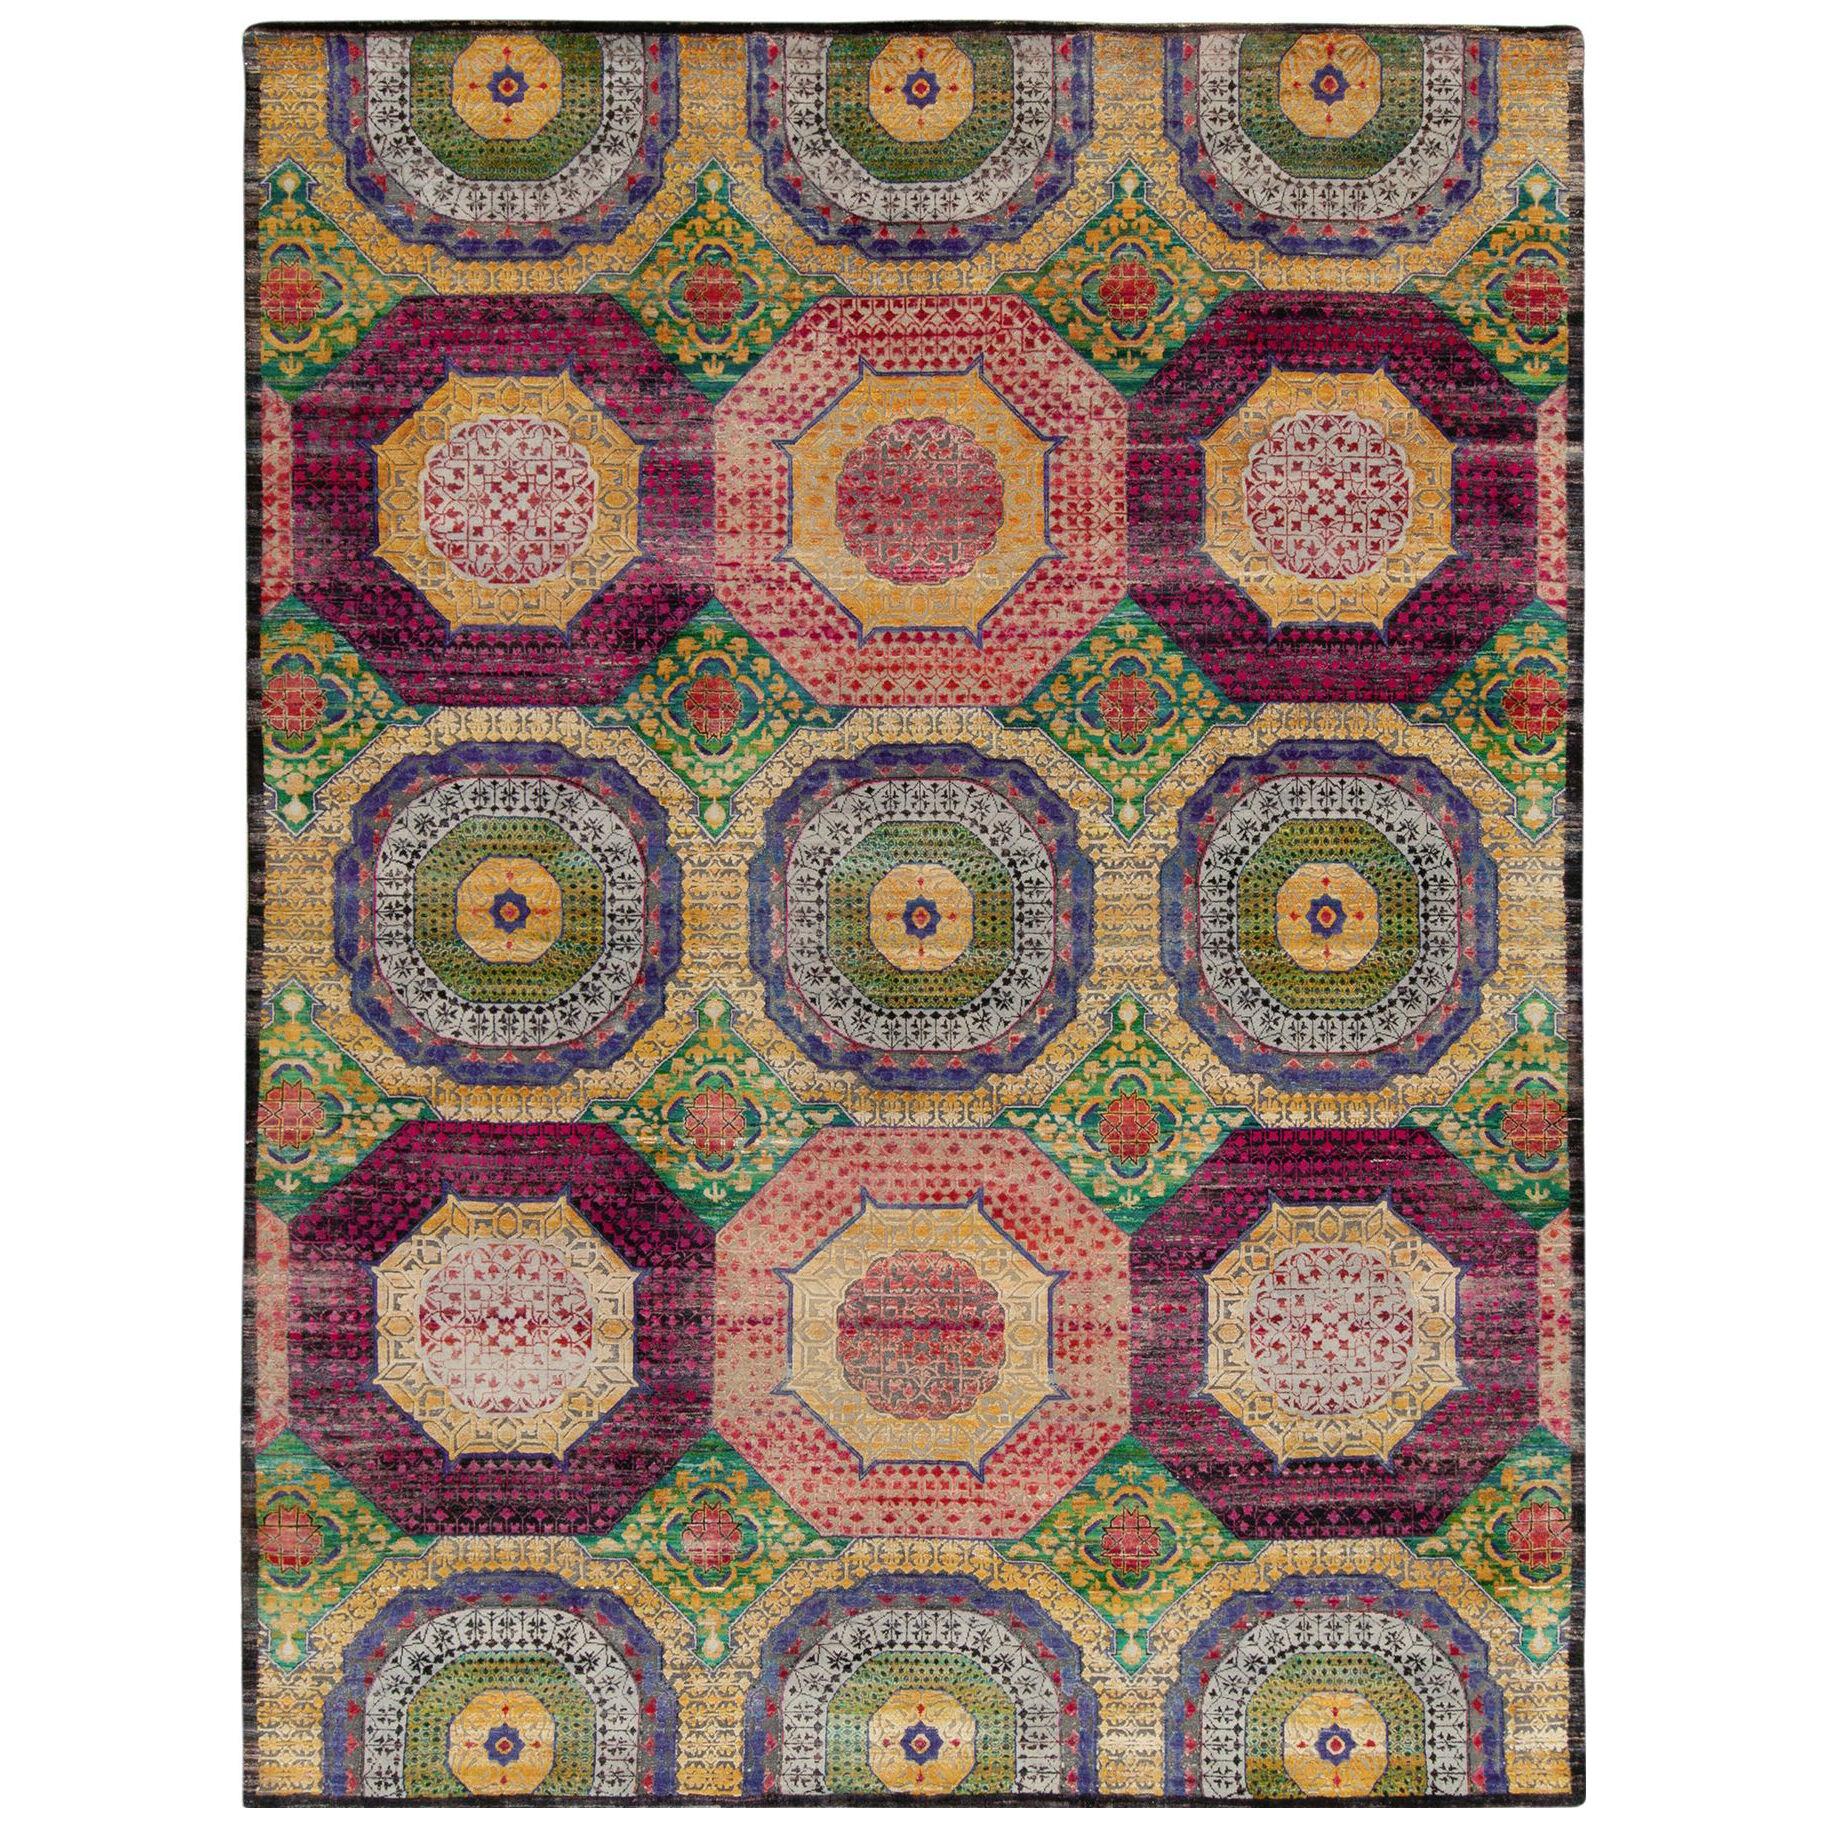 Rug & Kilim’s Mogul Style Rug in Gold, Purple and Blue Medallion Patterns